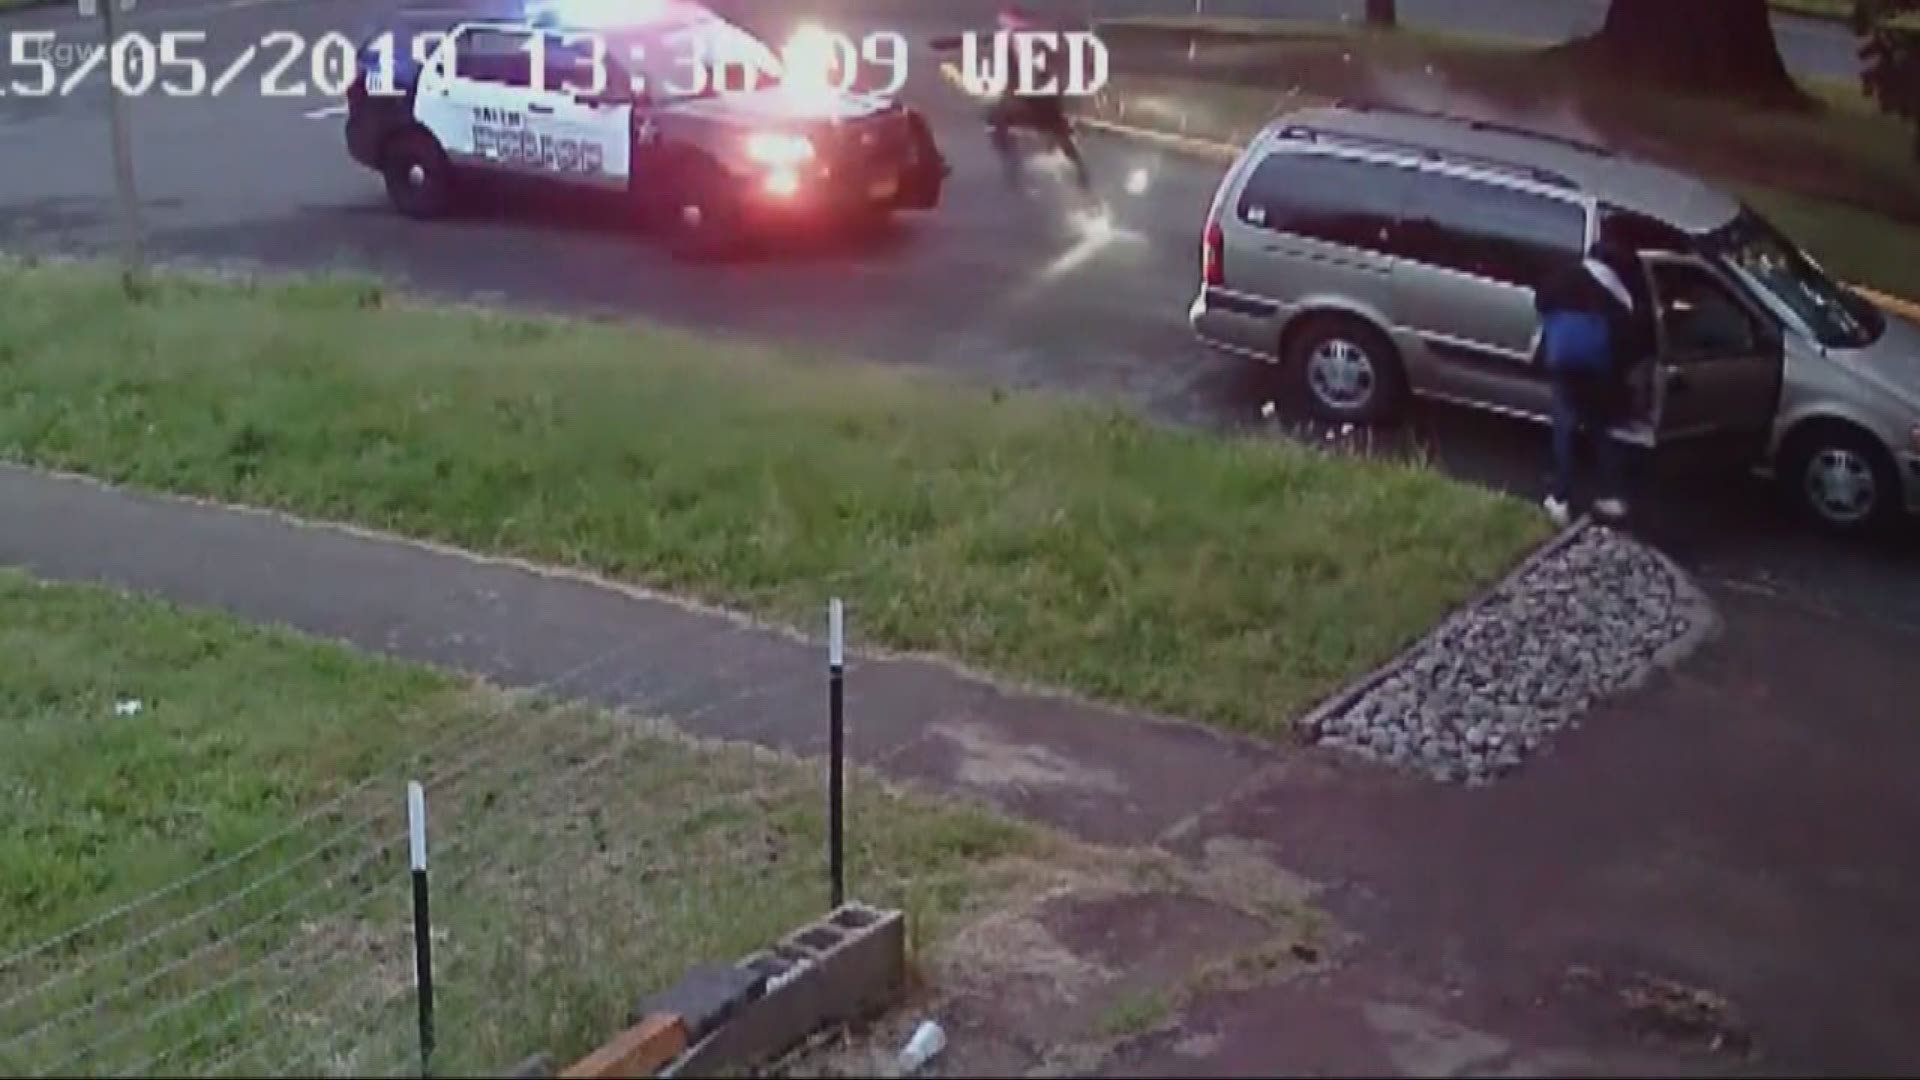 A home security cam captured a man shooting at a Salem police officer. A suspect was arrested about 12 hours later near the site of the shooting.